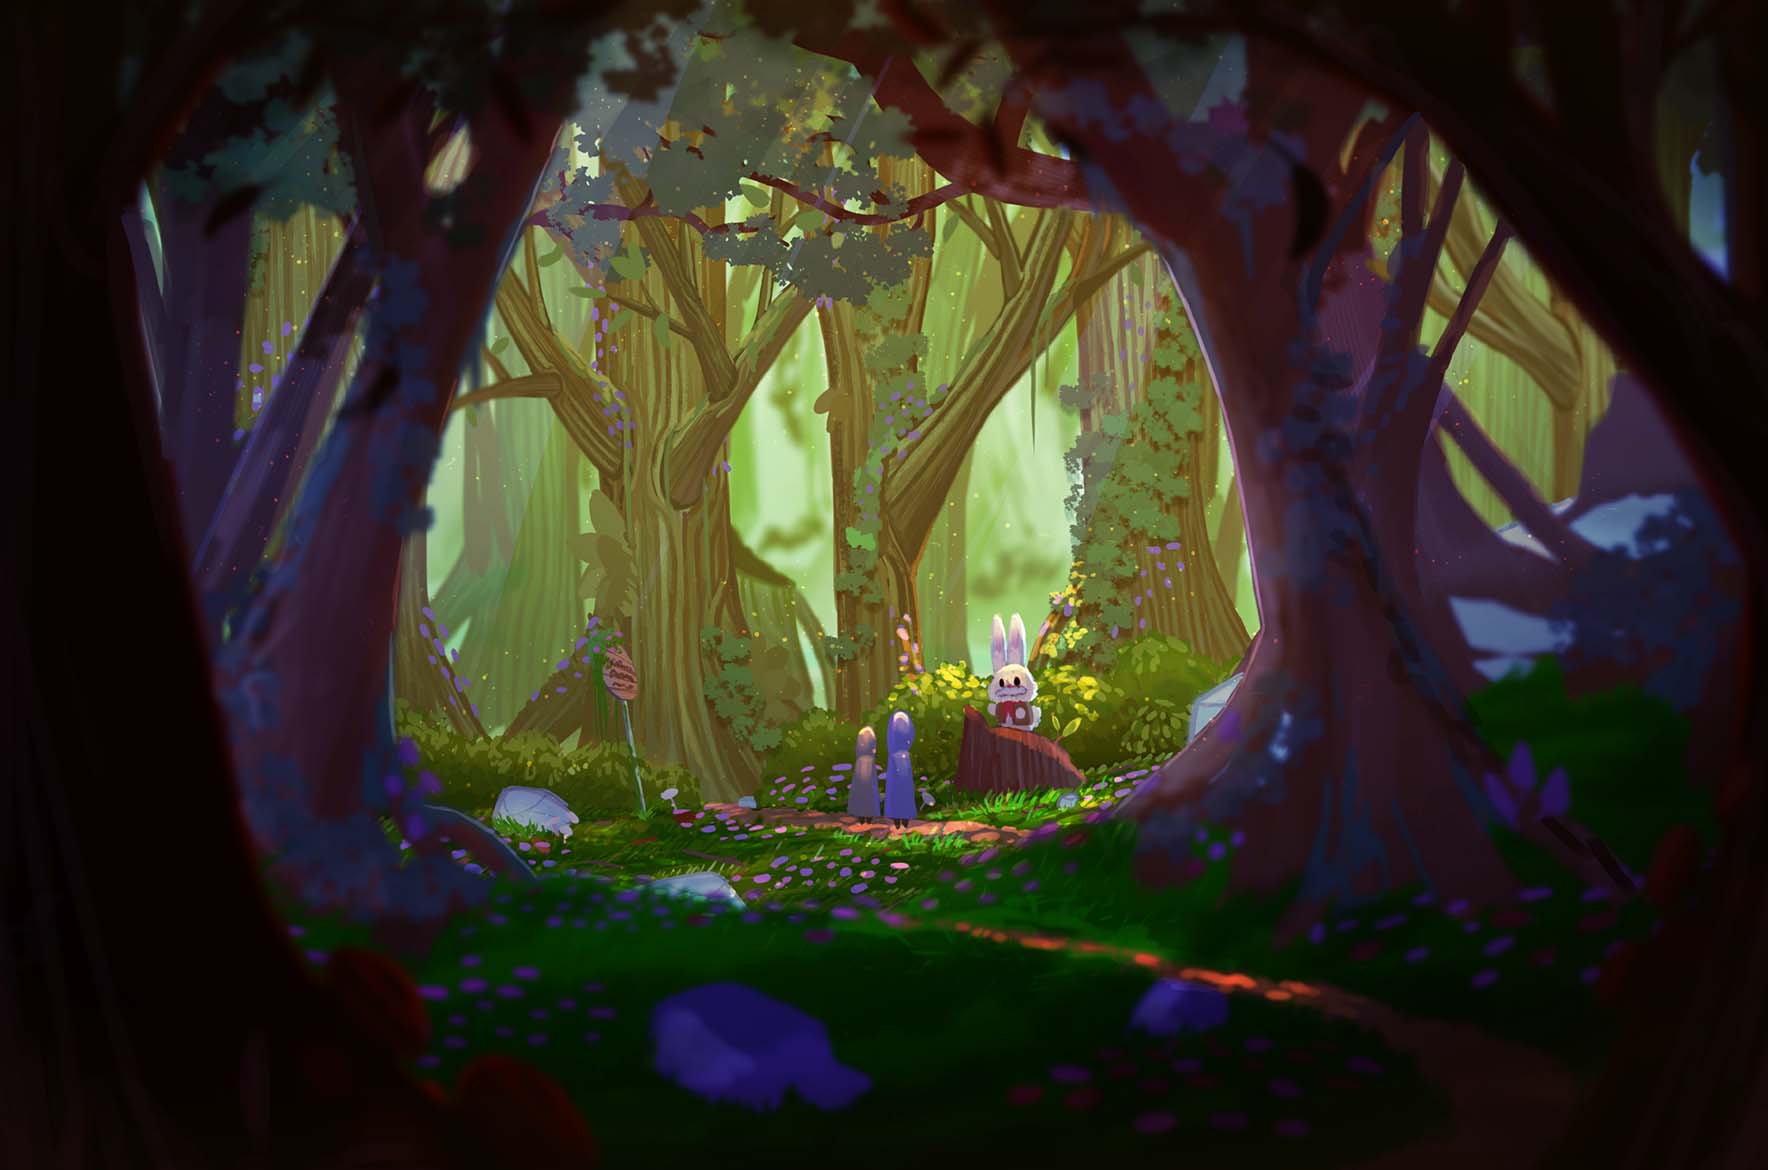 Concept art featuring a rabbit sitting on a stone in a green forest